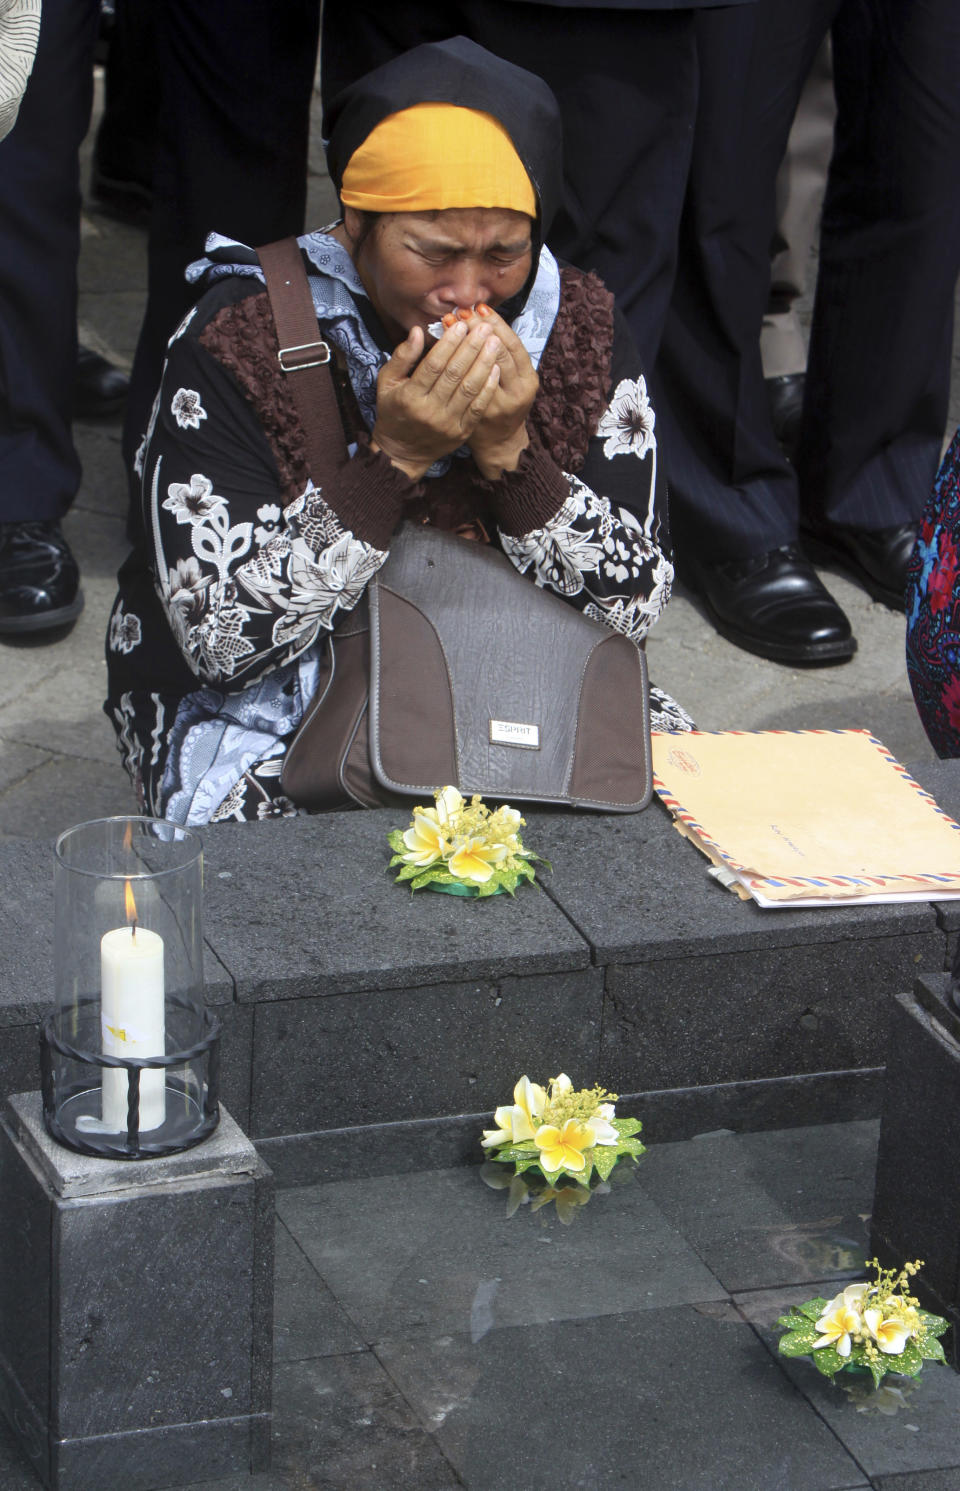 An Indonesian woman grieves for victims of the 2002 Bali bombings at a memorial pond during a memorial service to mark the 10th anniversary of the terrorists attacks in Kuta, in Jimbaran in Bali, Indonesia, Friday, Oct. 12, 2012. A decade after twin bombs killed scores of tourists partying at two beachfront nightclubs on Indonesia's resort island of Bali, survivors and victims' families on Friday braved a fresh terrorism threat to remember those lost to the tragedy. (AP Photo/Firdia Lisnawati)